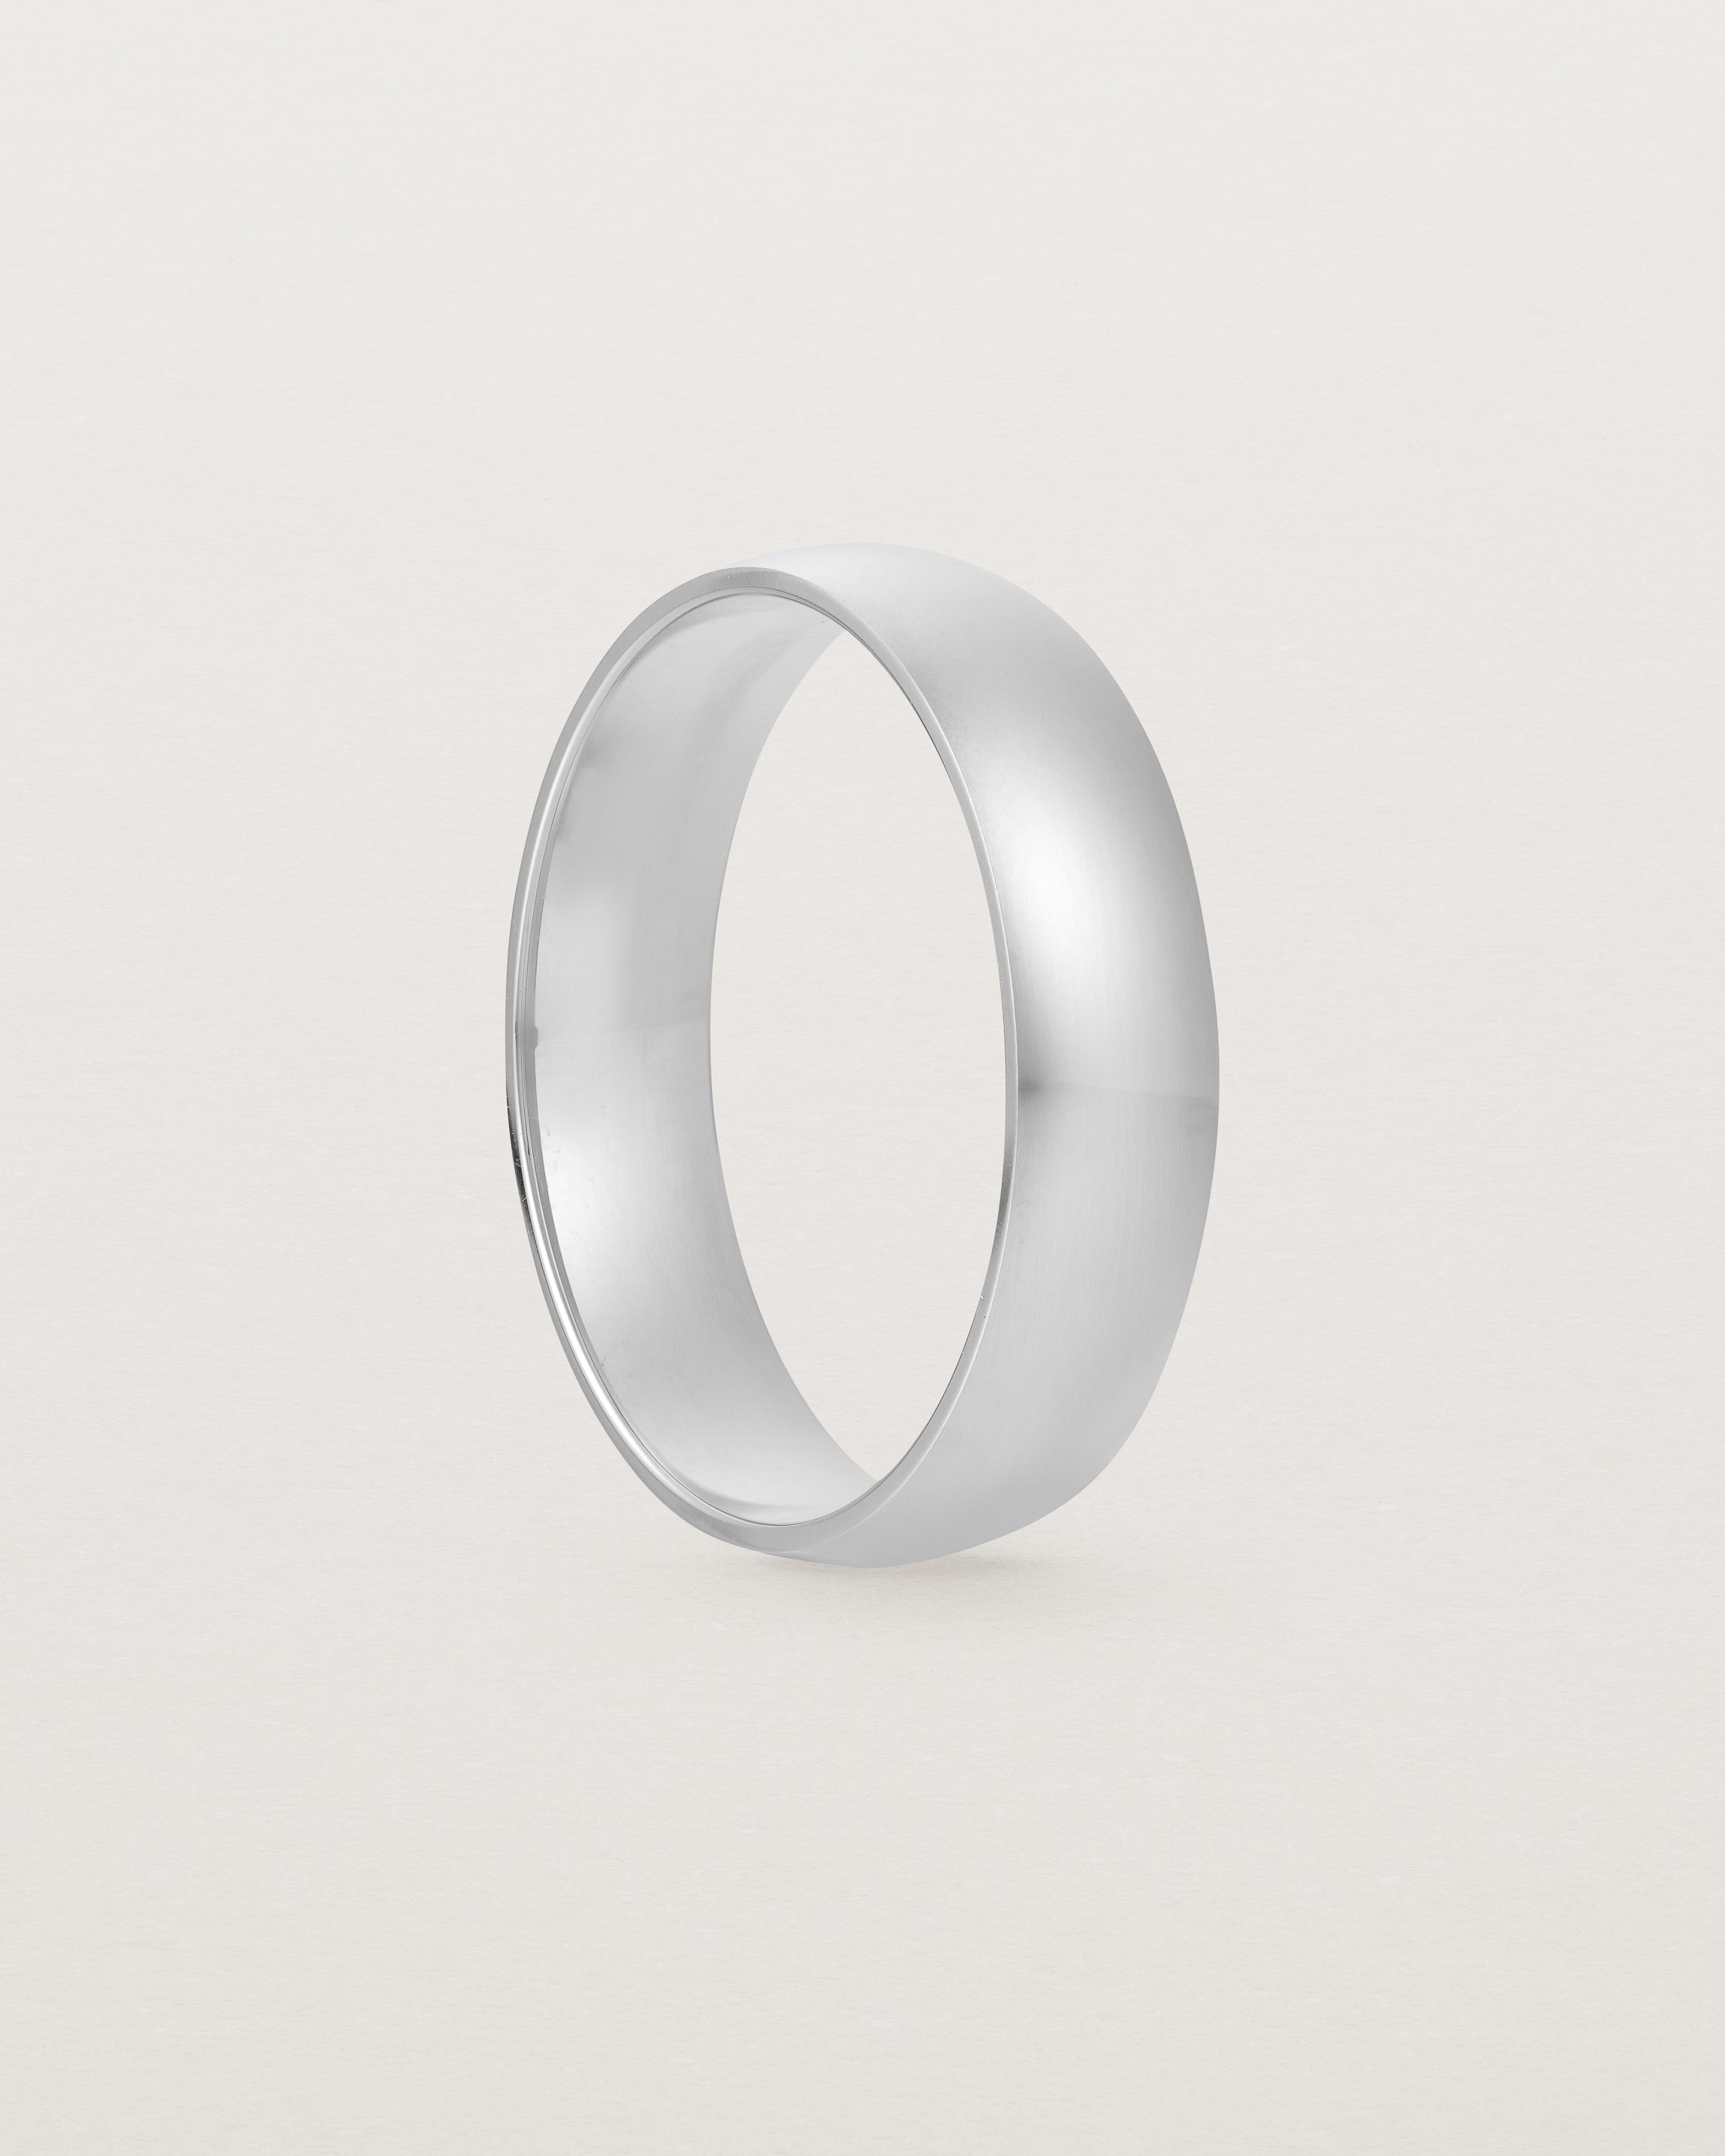 A classic 5mm wedding band, our most popular width, crafted in sterling silver